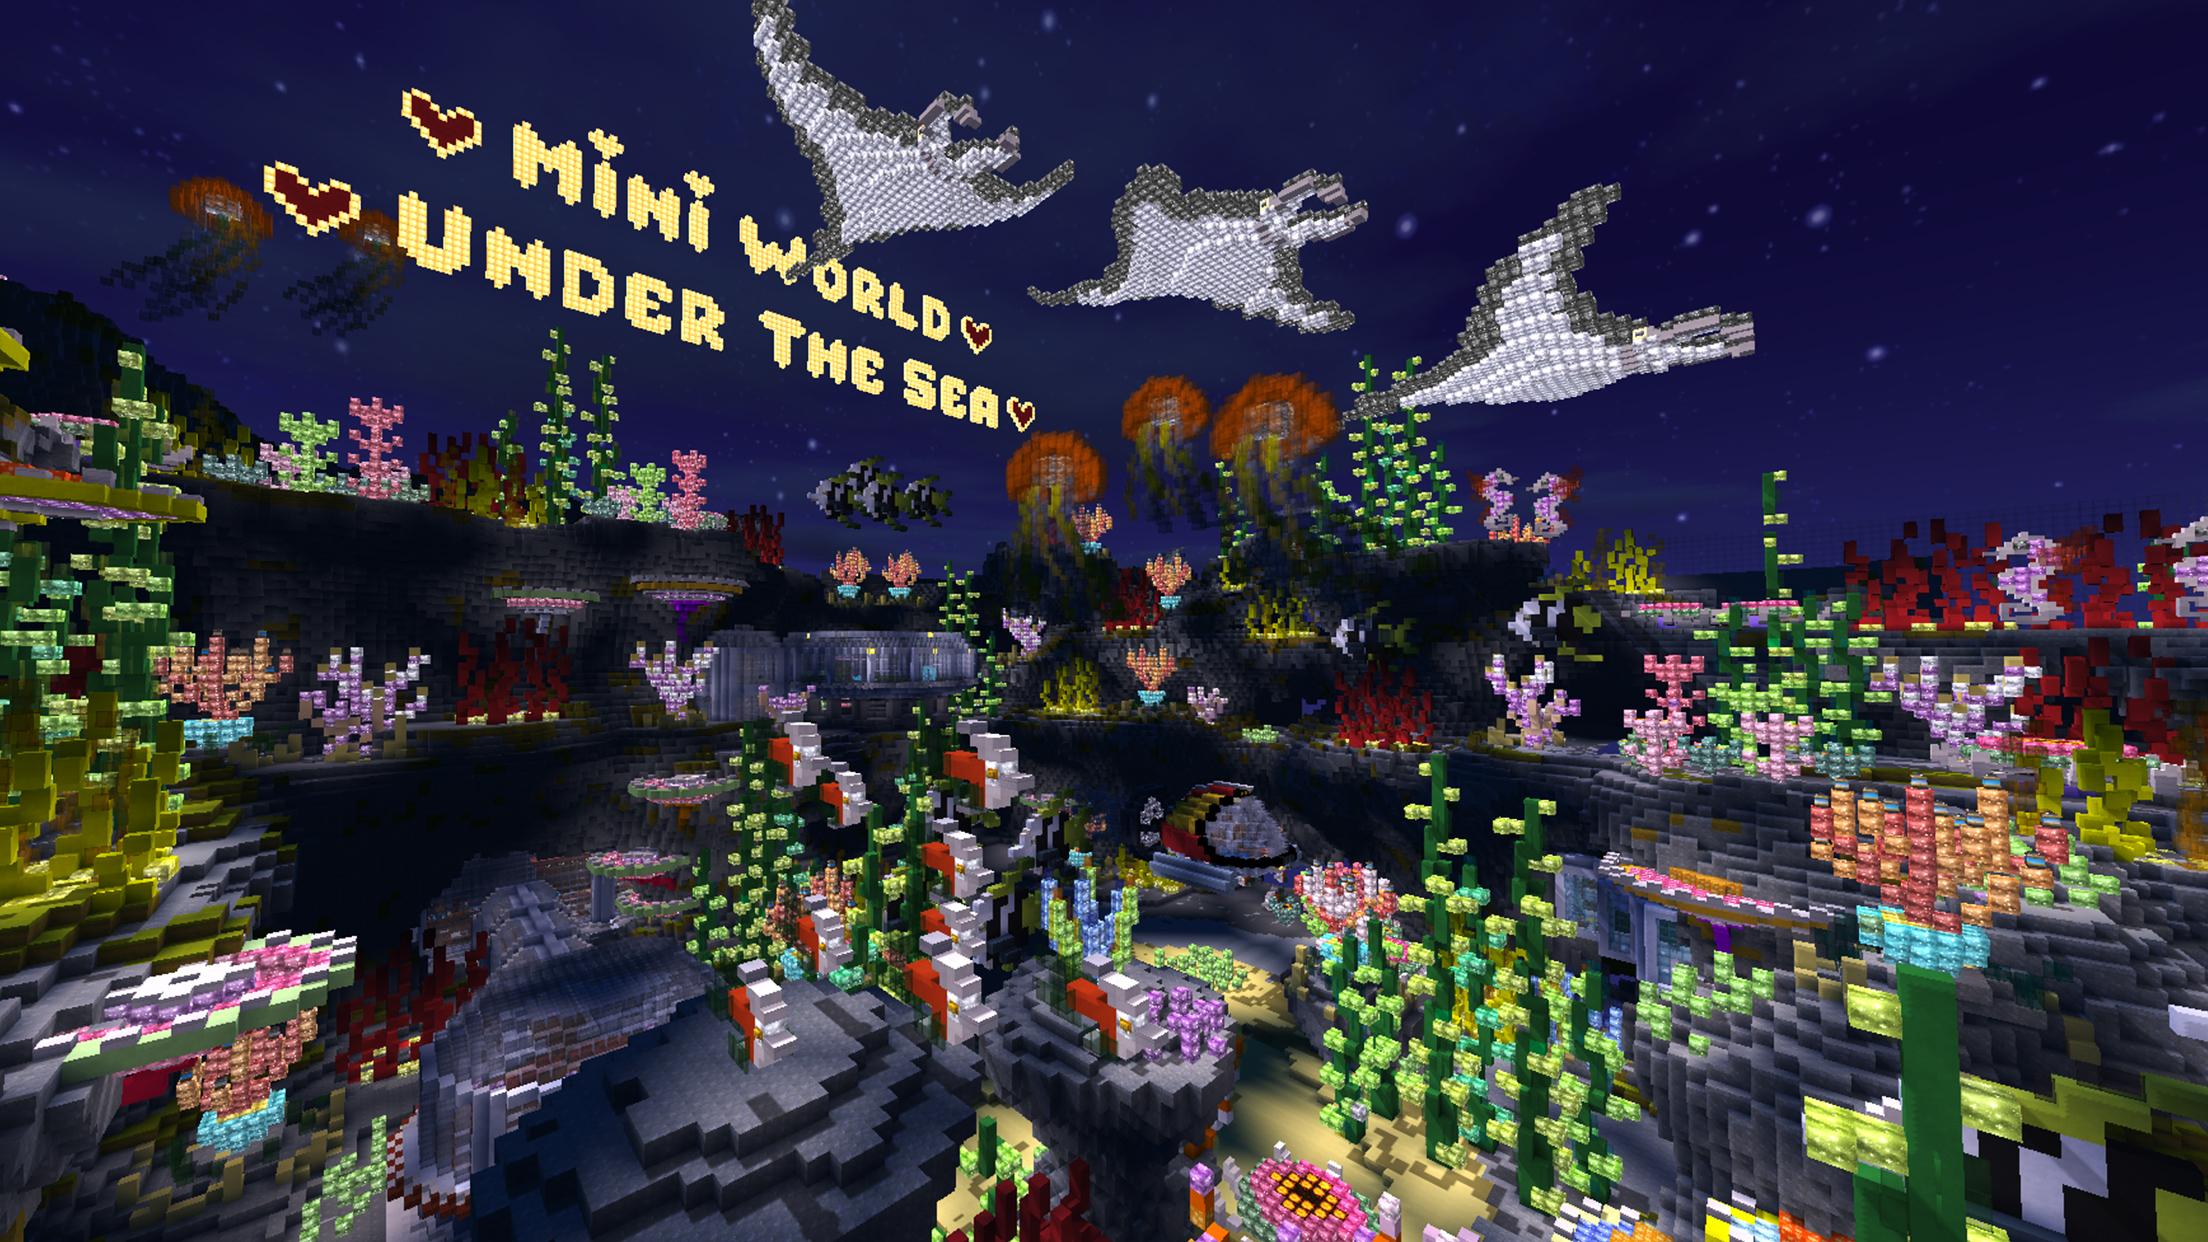 Mini World for Android - APK Download - 